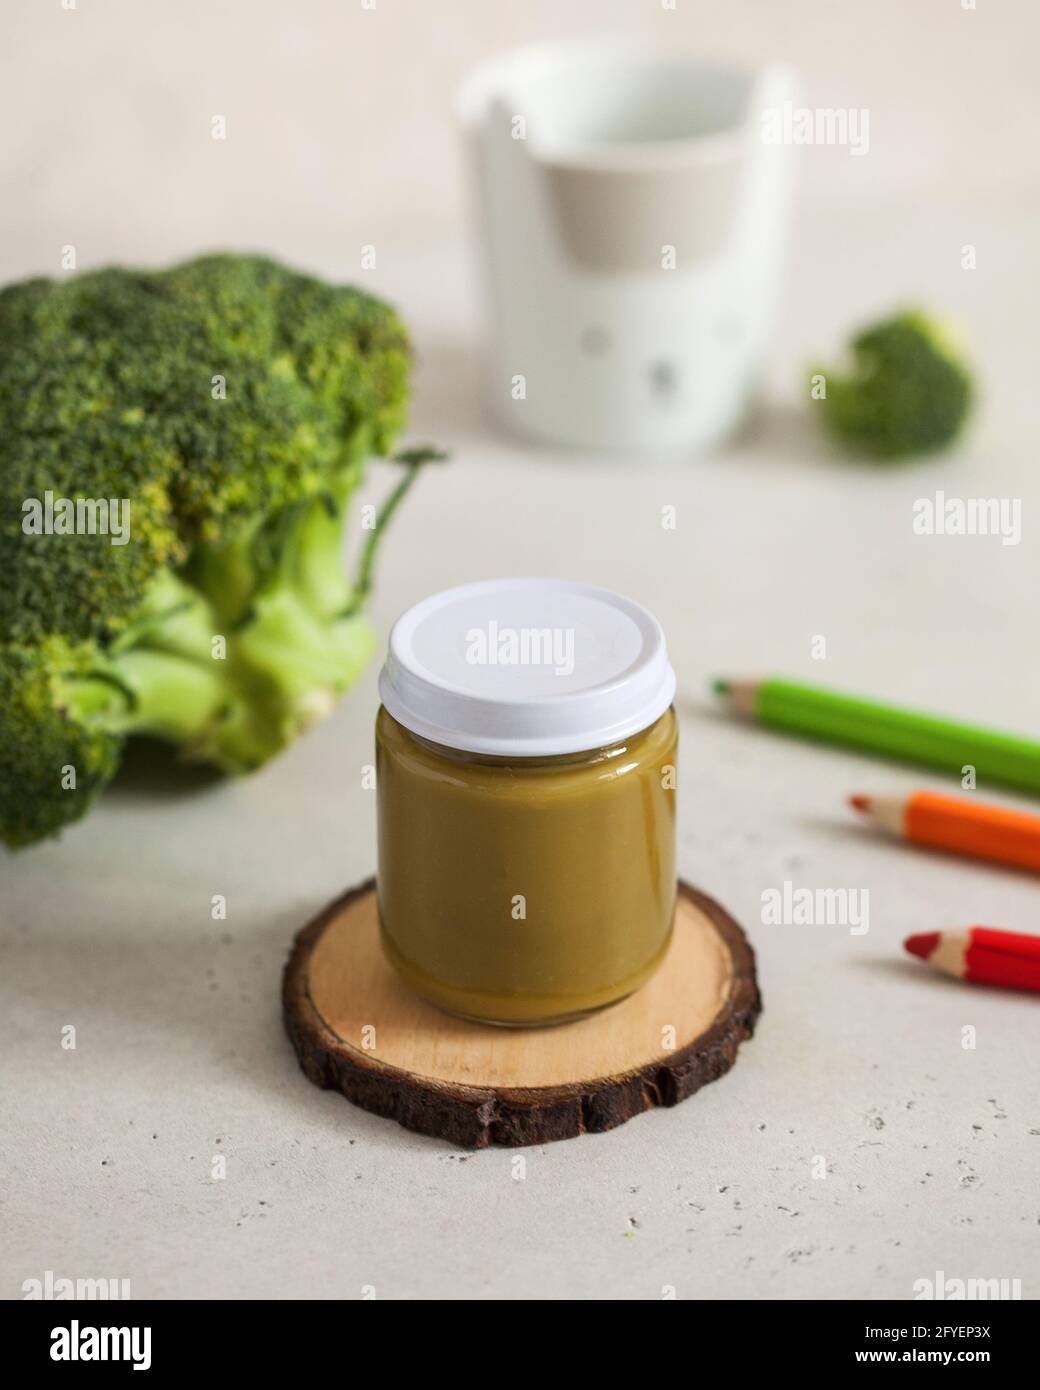 Closed glass jar with baby food broccoli puree with fresh broccoli and colored pencils Layout. The concept of baby food Stock Photo